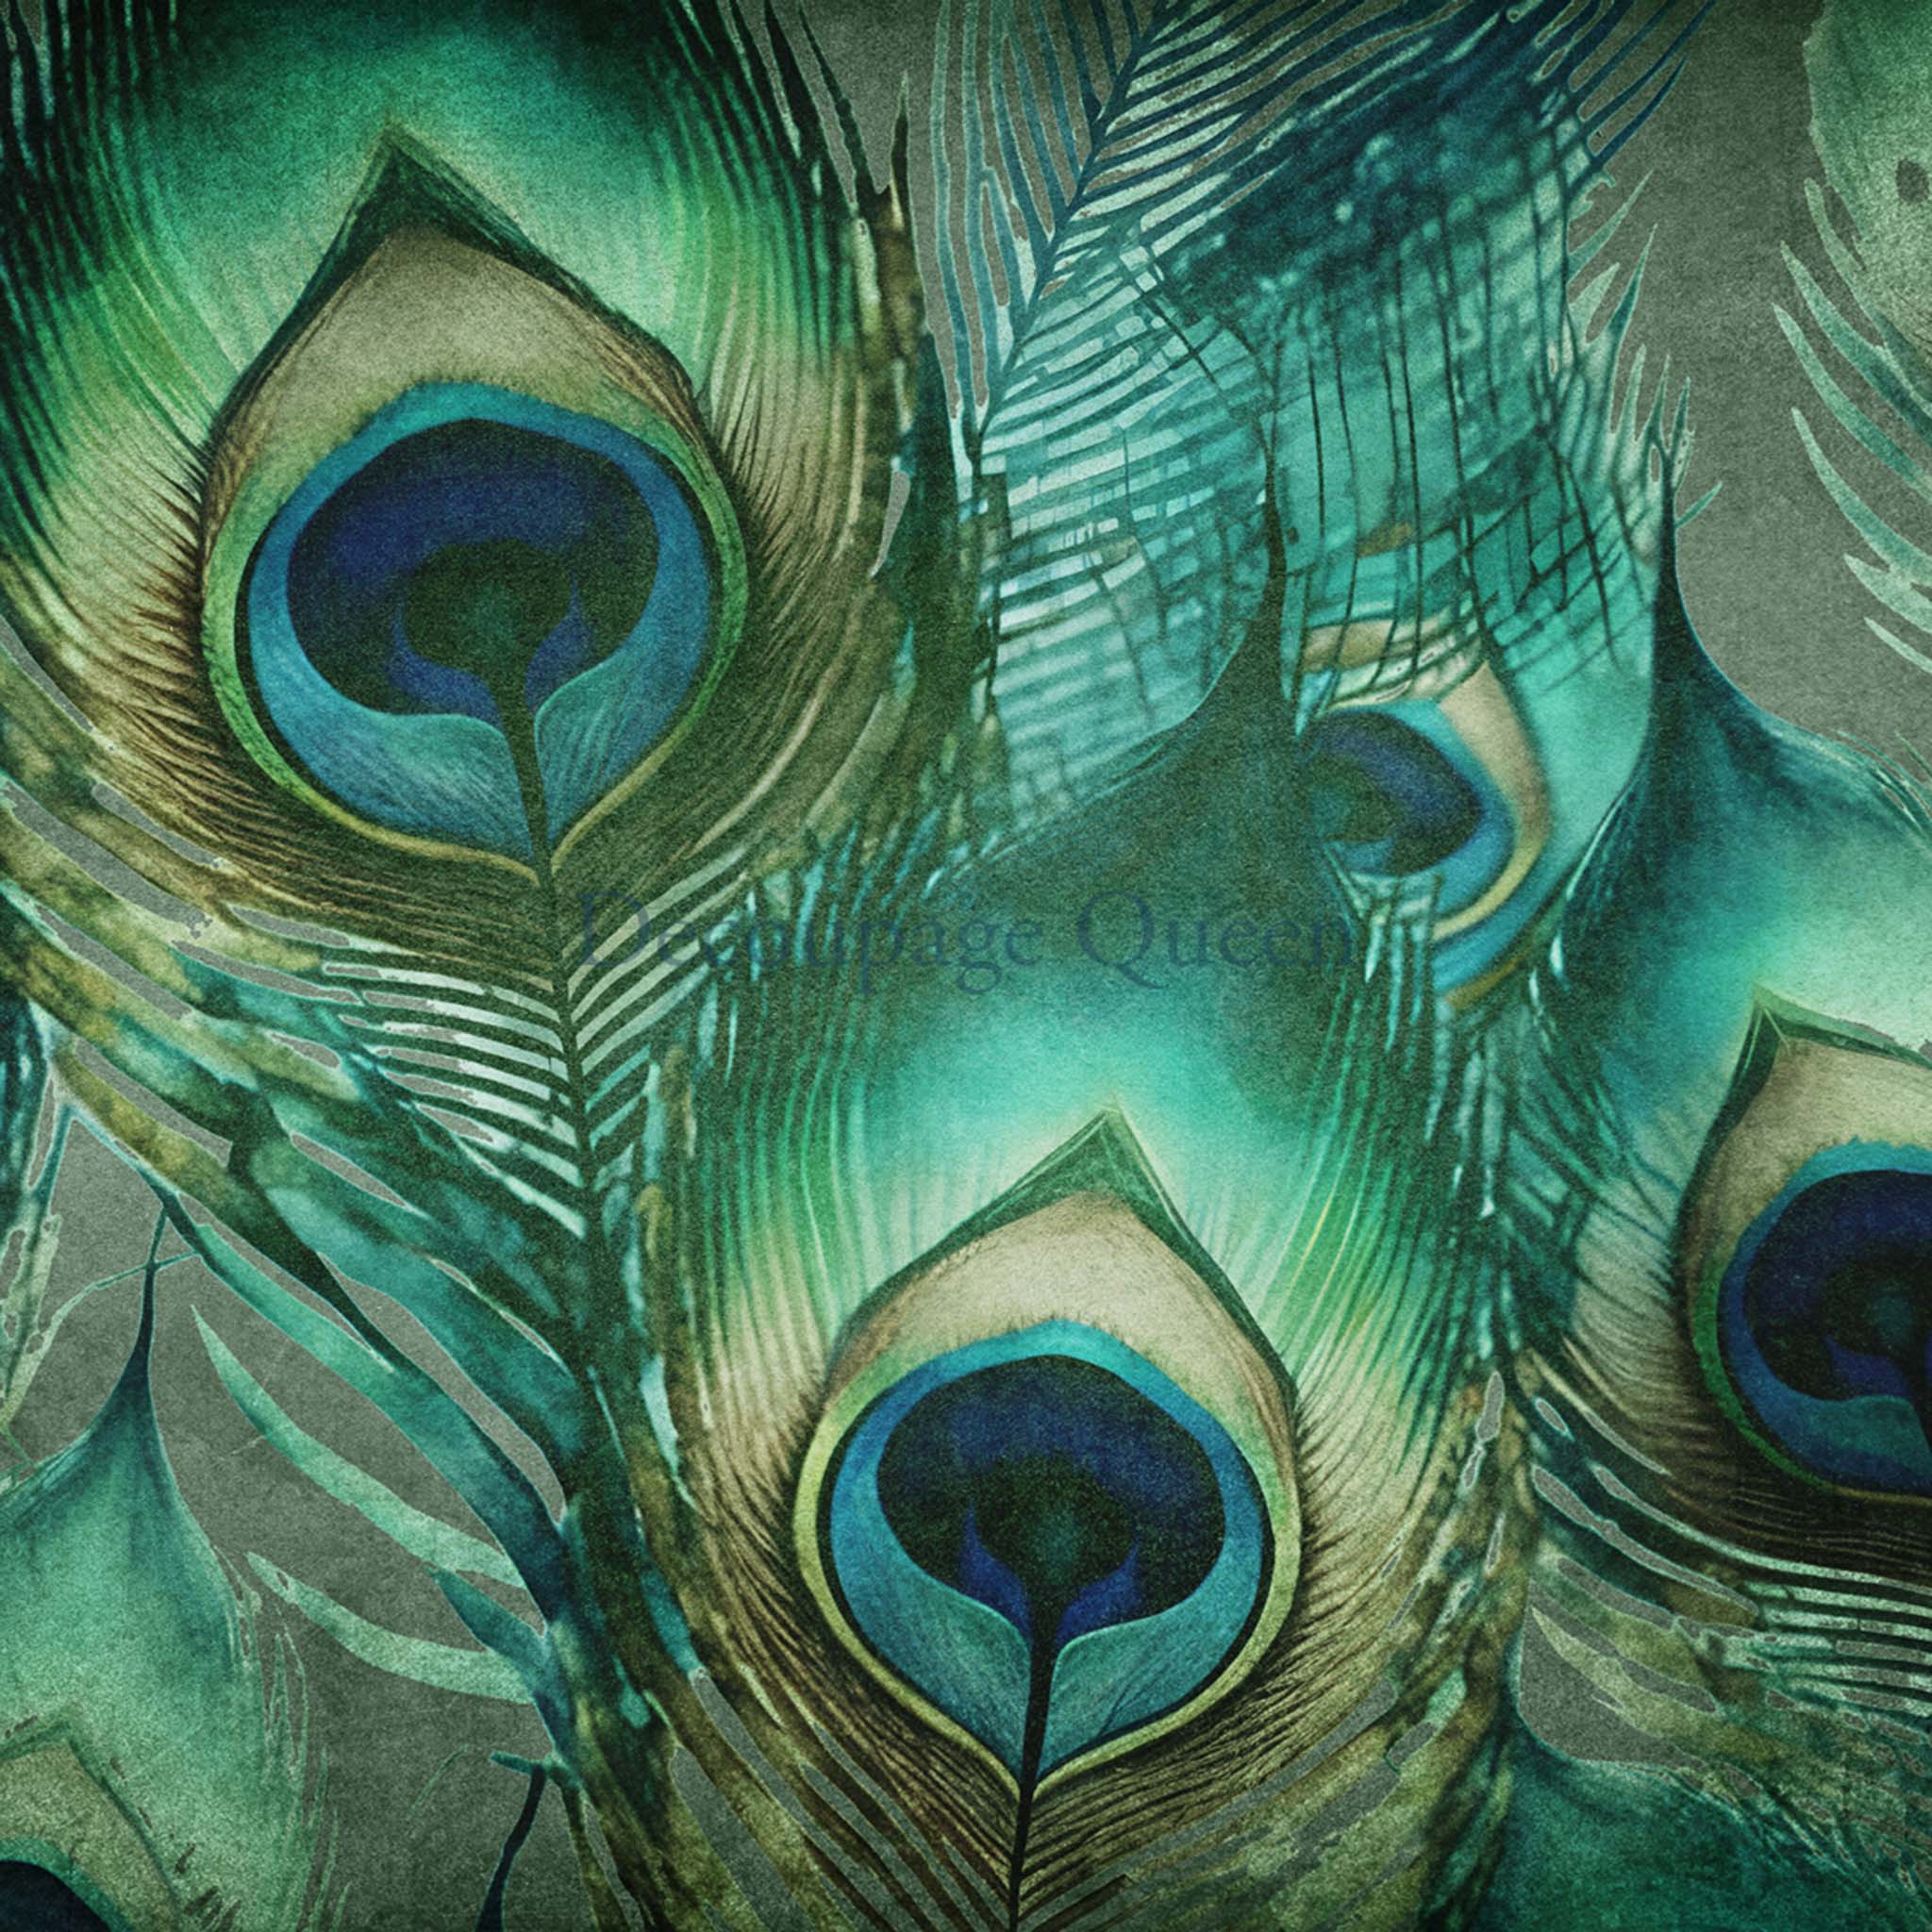 Close-up of an A3 rice paper design that features a close-up of peacock feathers in shades of jade, teal, and navy.